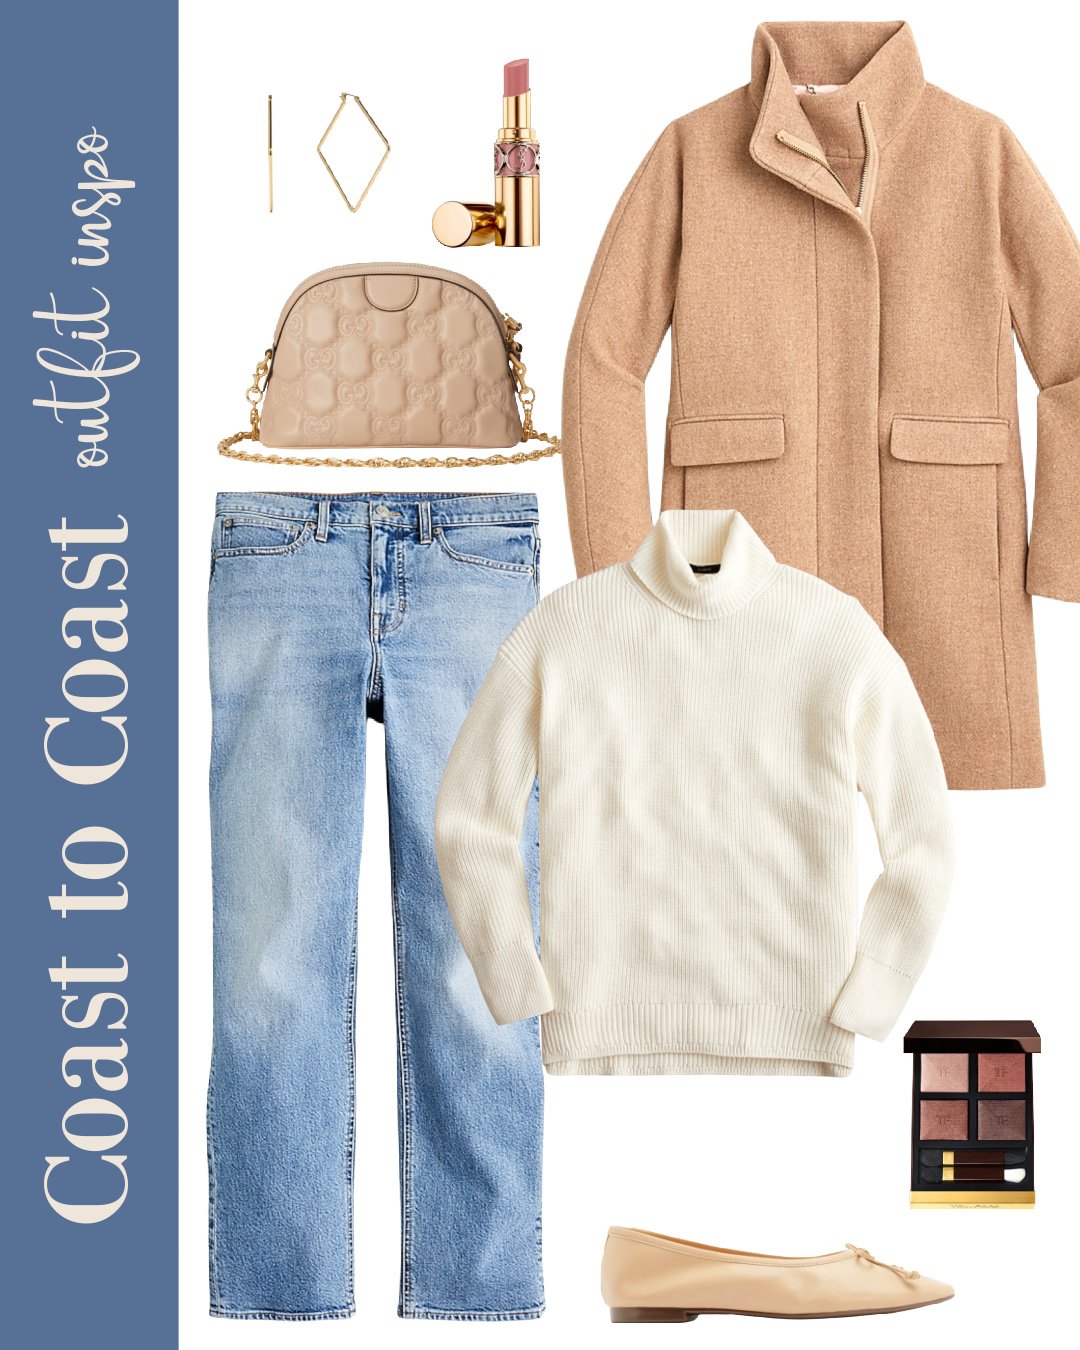 J Crew Outfit inspo for October Sale round up